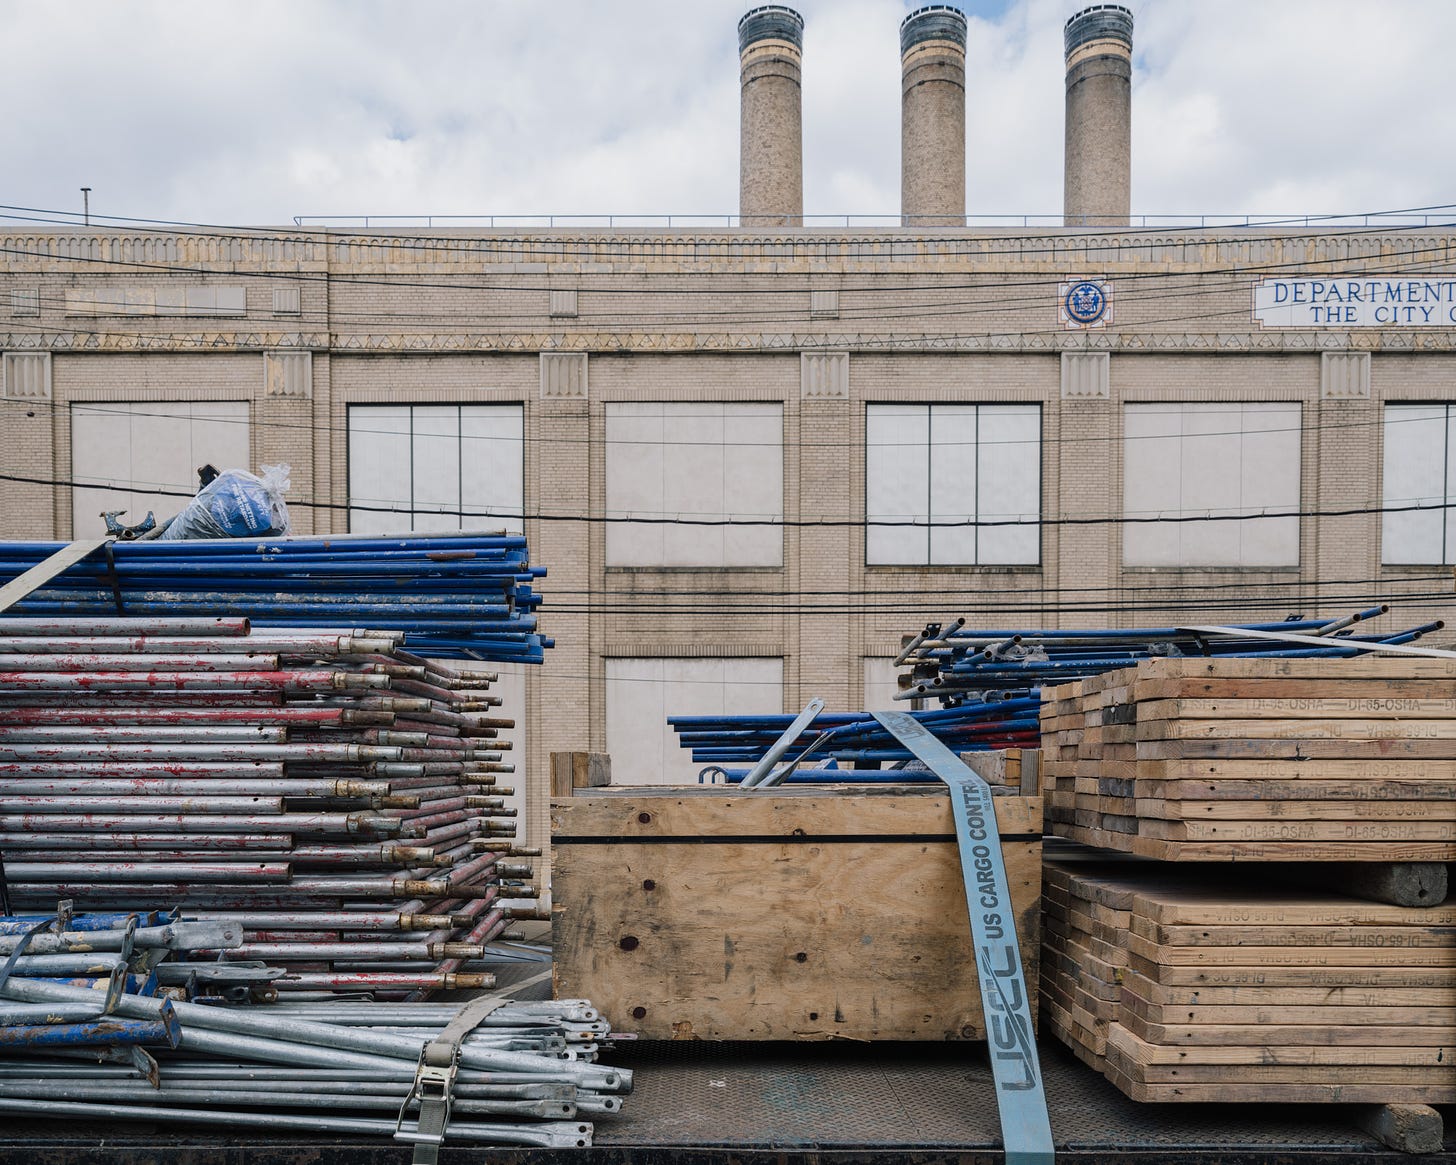 Stacks-Of-Metal-Pipes-And-Wooden-Planks-In-Foreground-With-Three-Yellow-Brick-Smokestacks-Behind